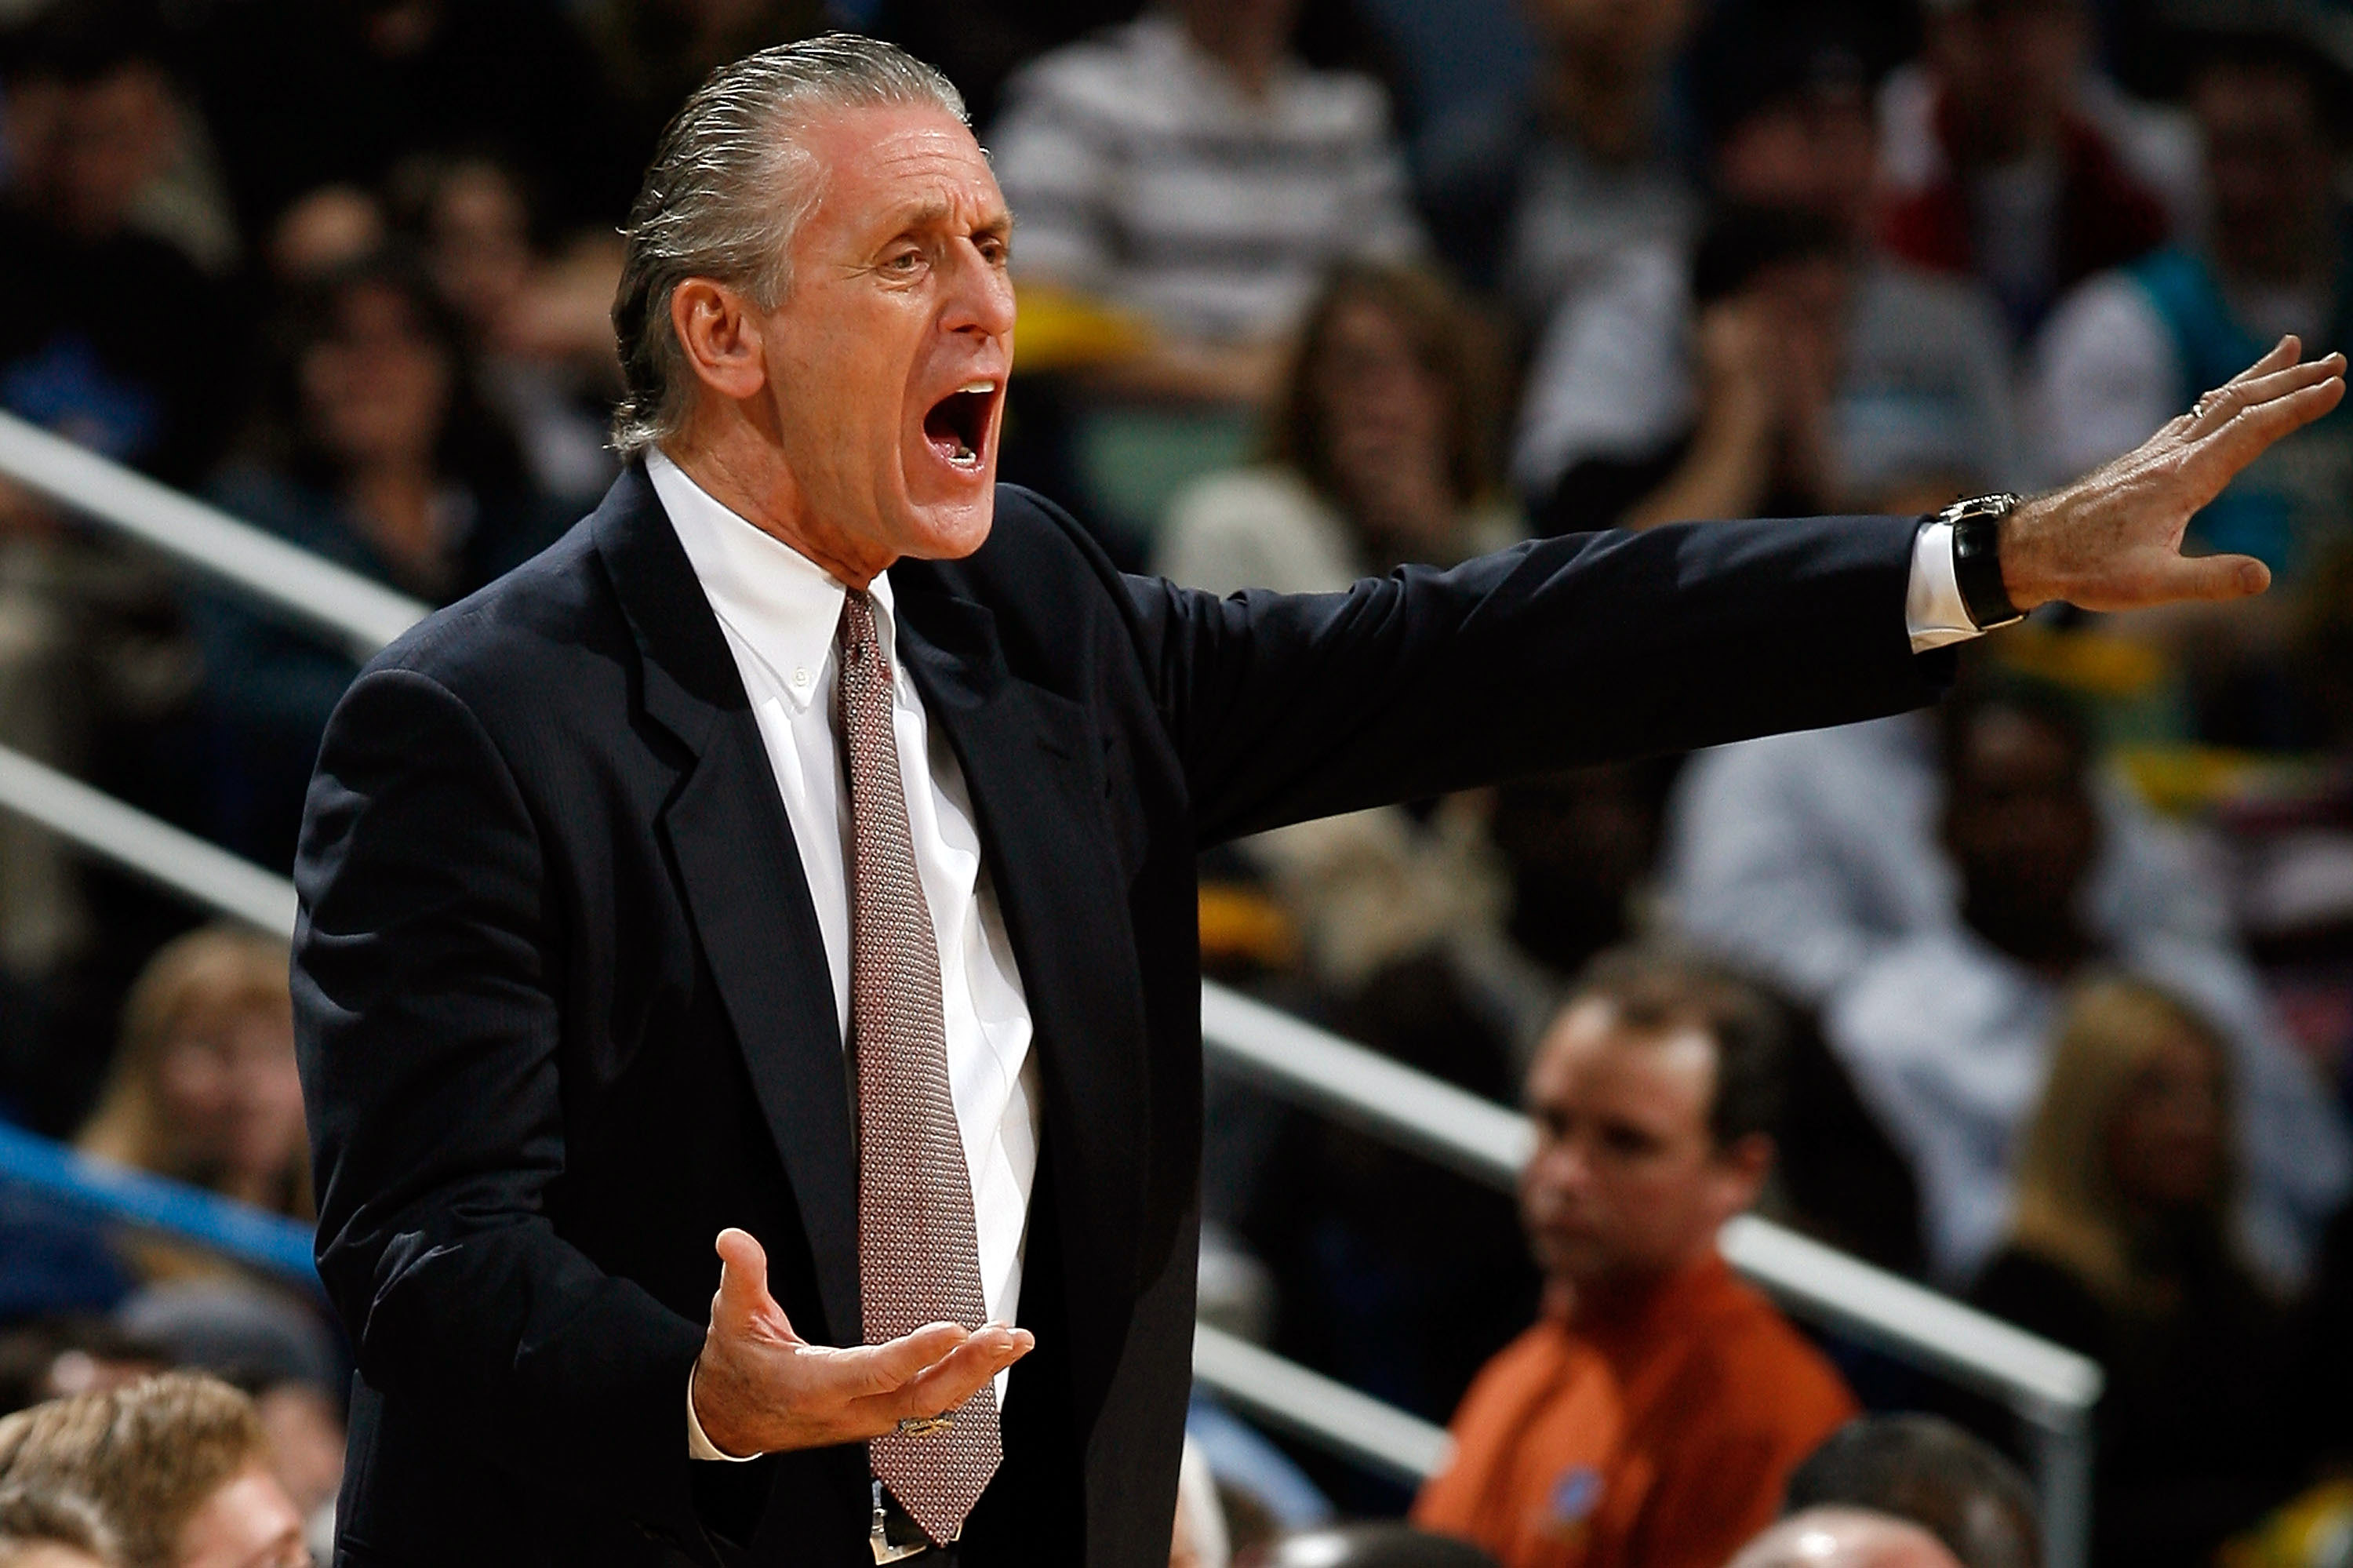 NEW ORLEANS - JANUARY 11:  Head coach Pat Riley of the Miami Heat calls a play against the New Orleans Hornets on January 11, 2008 at the New Orleans Arena in New Orleans, Louisiana. The Hornets defeated the Heat 114-88.   NOTE TO USER: User expressly ack